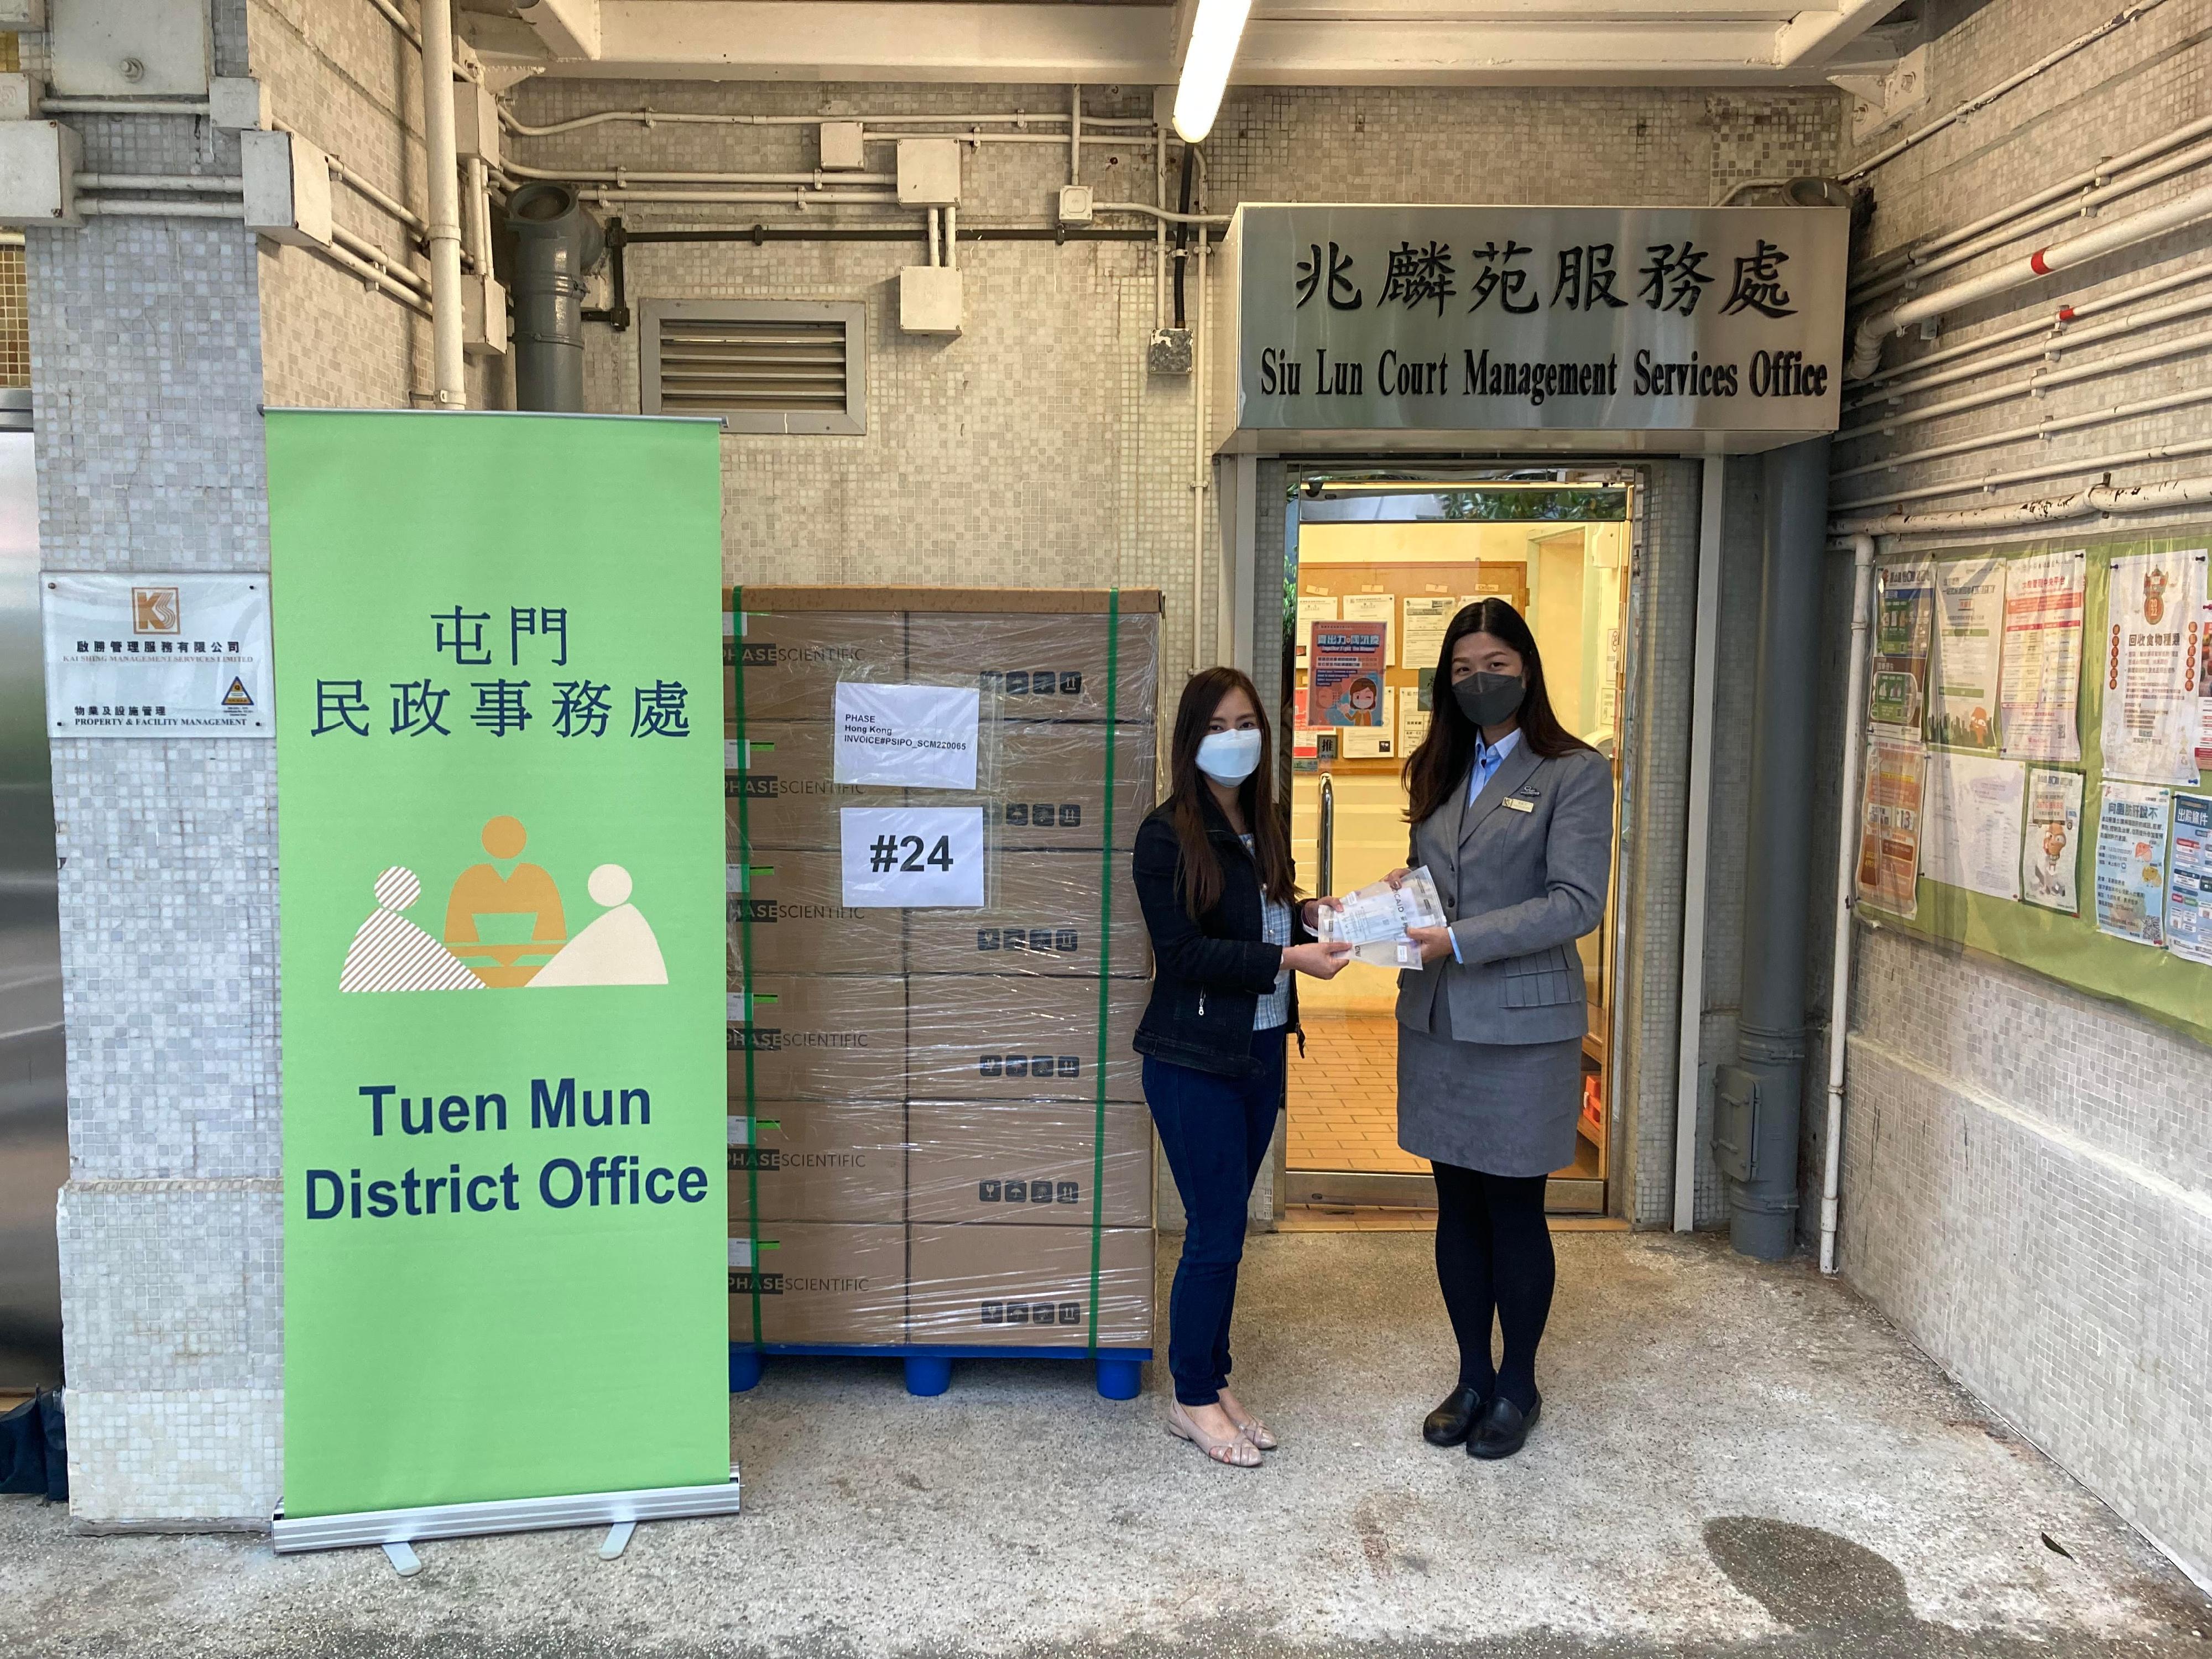 The Tuen Mun District Office today (March 23) distributed COVID-19 rapid test kits to households, cleansing workers and property management staff living and working in Siu Lun Court for voluntary testing through the property management company.